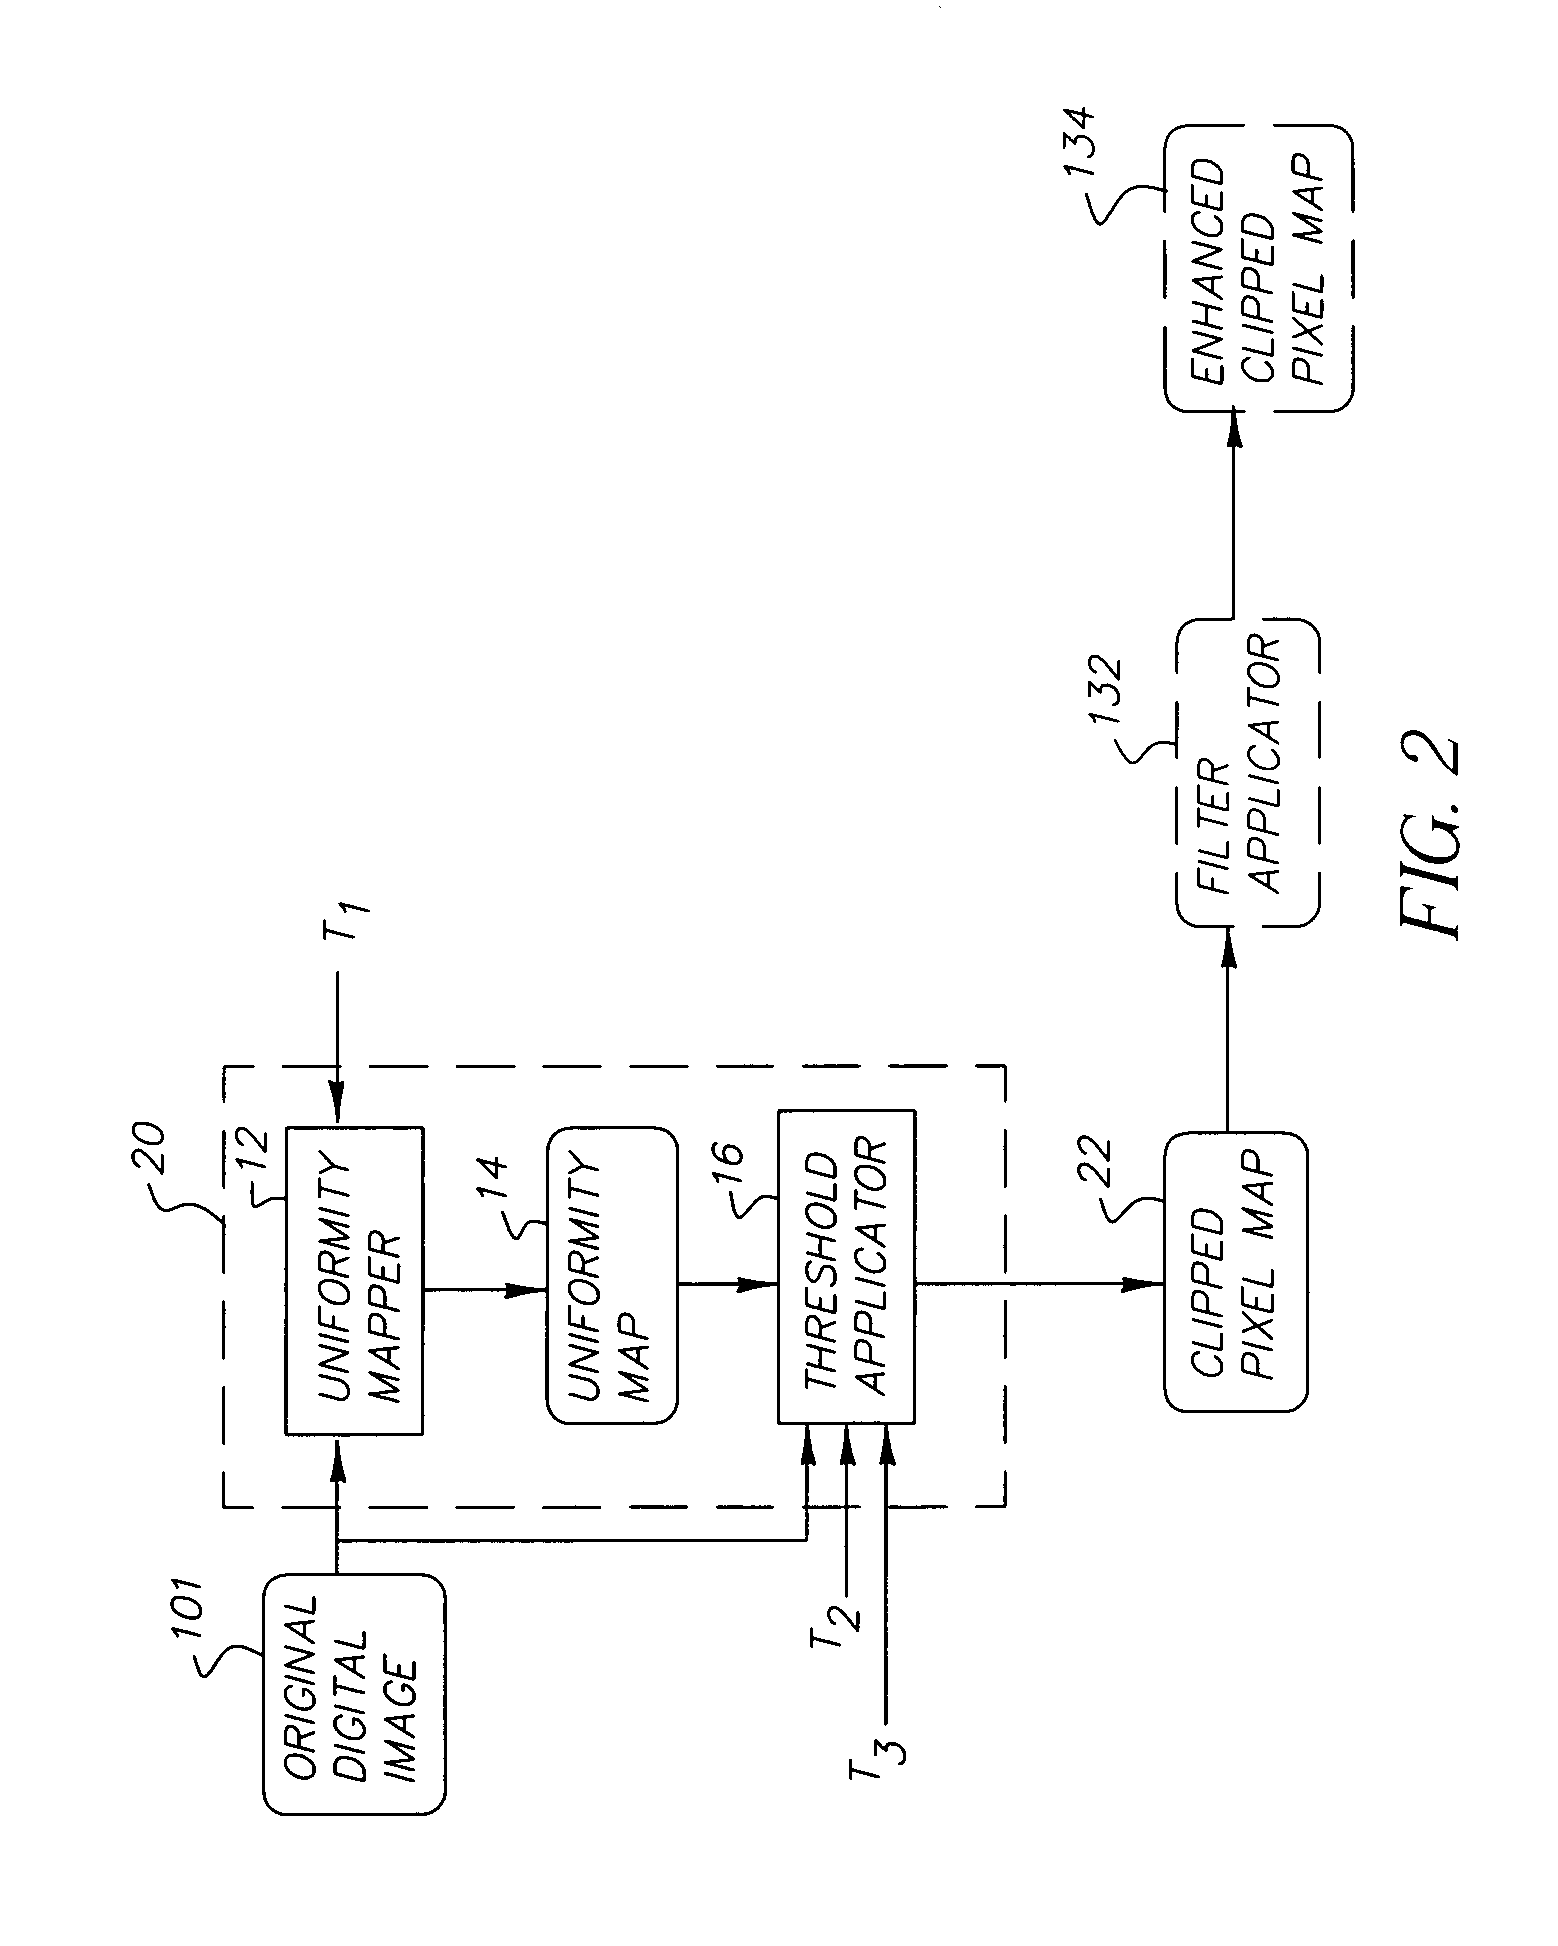 Method of detecting clipped image pixels